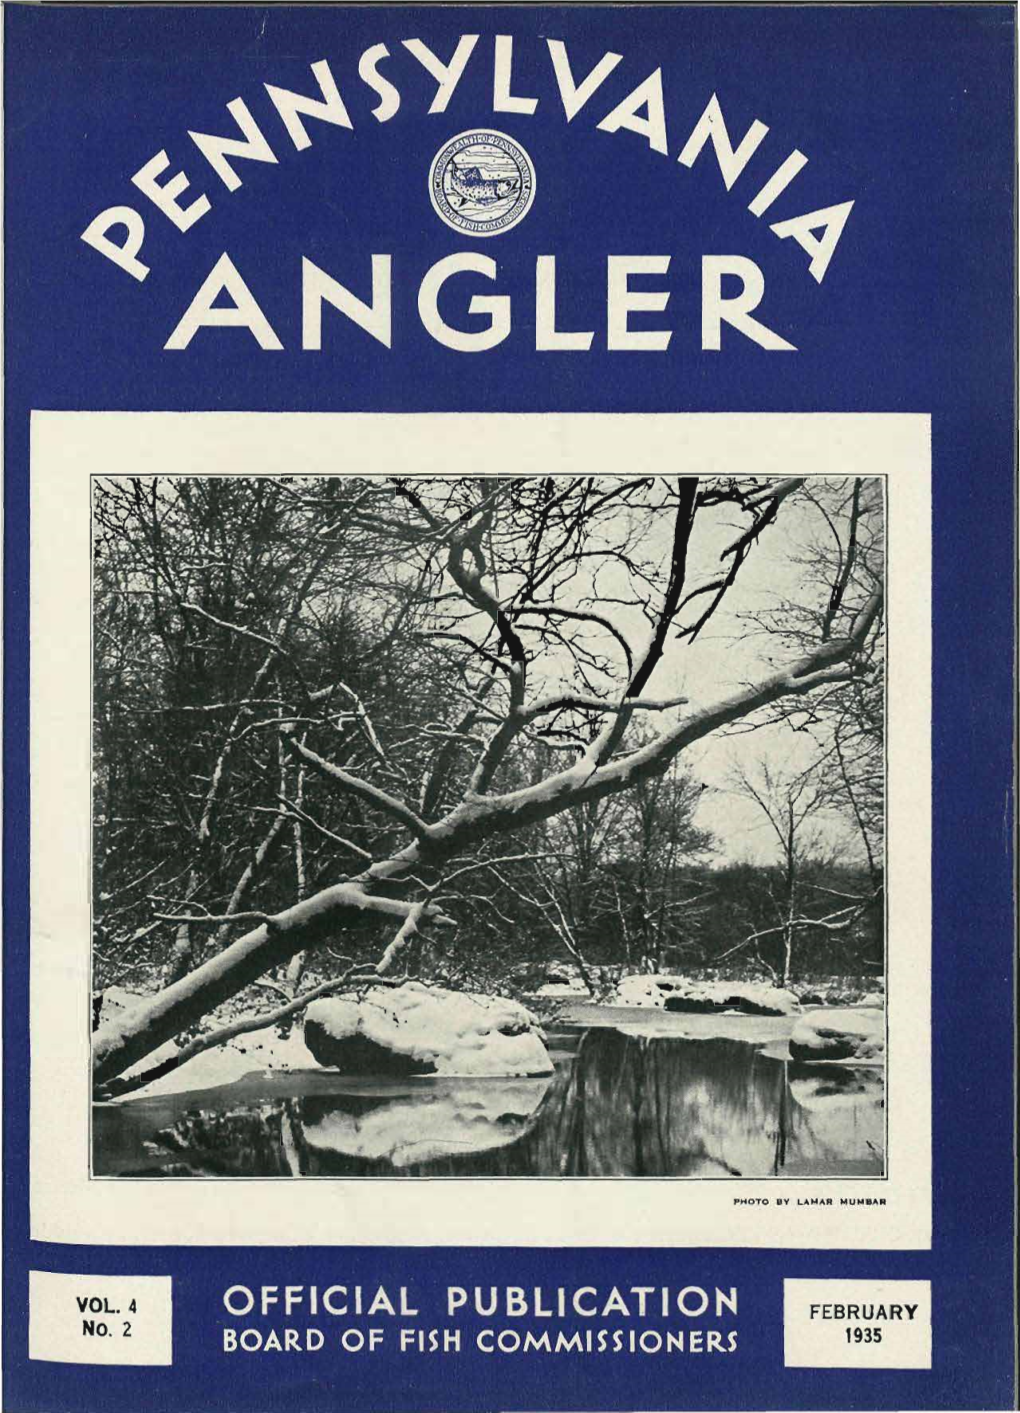 PHOTO by LAMAR MUMBAR & OFFICIAL STATE FEBRUARY, 1935 PUBLICATION ^ANGLER/ Vol.4 No